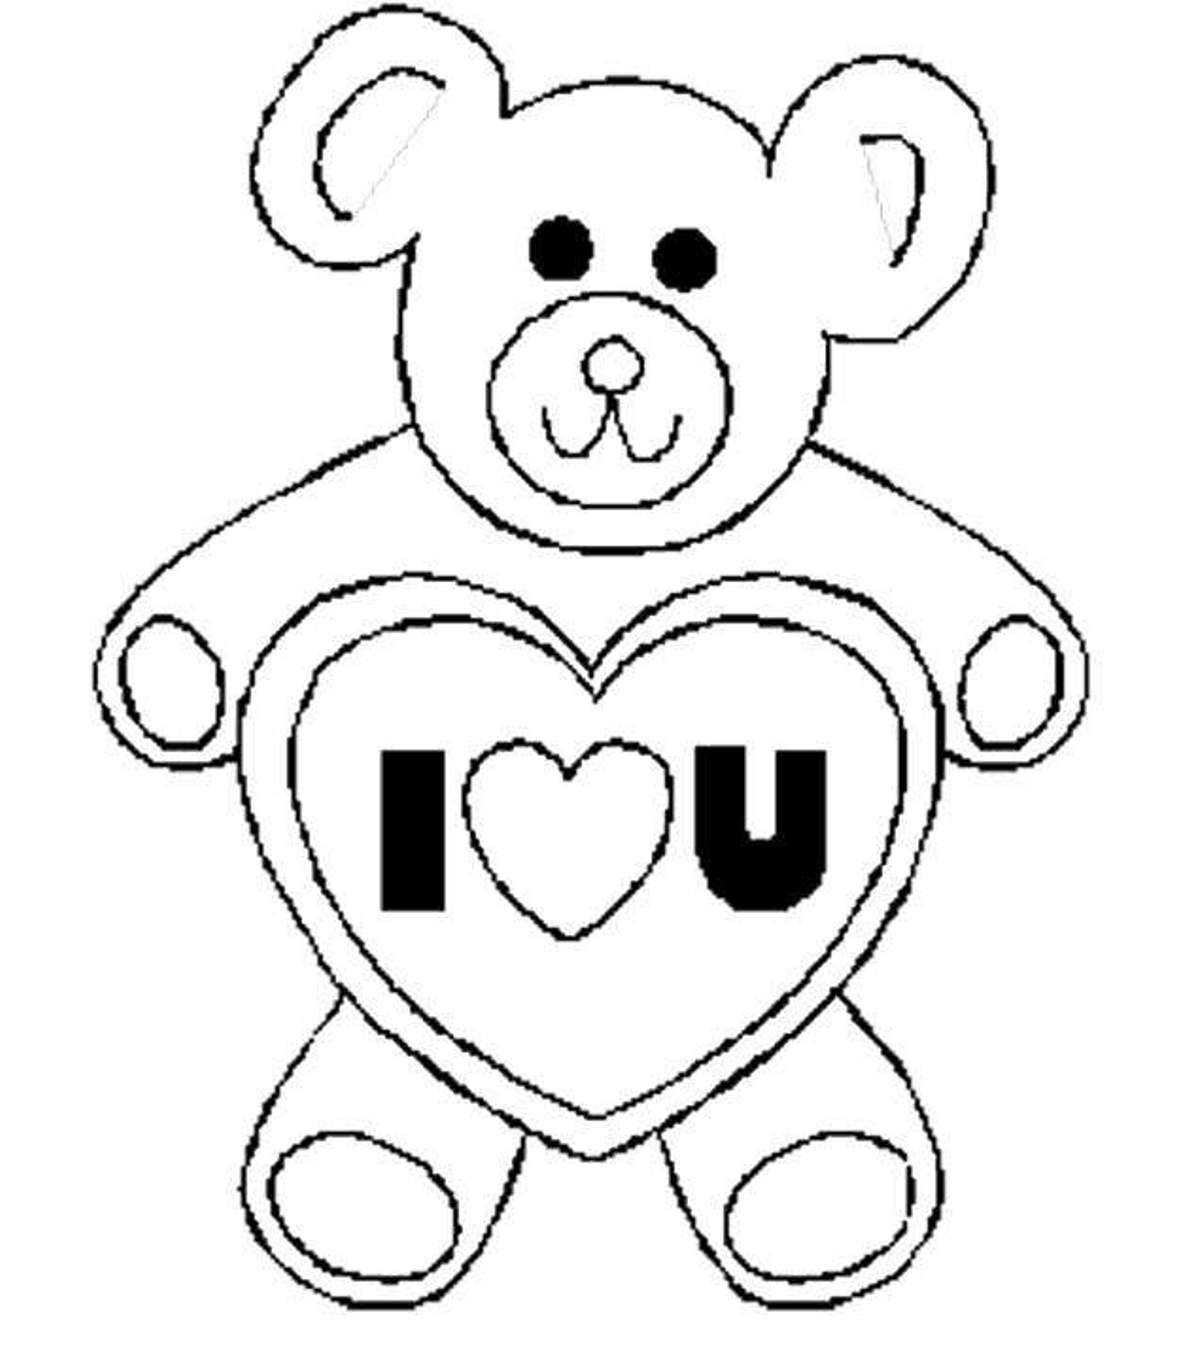 Valentines Day S Bear I Love Ucd60 Coloring Page